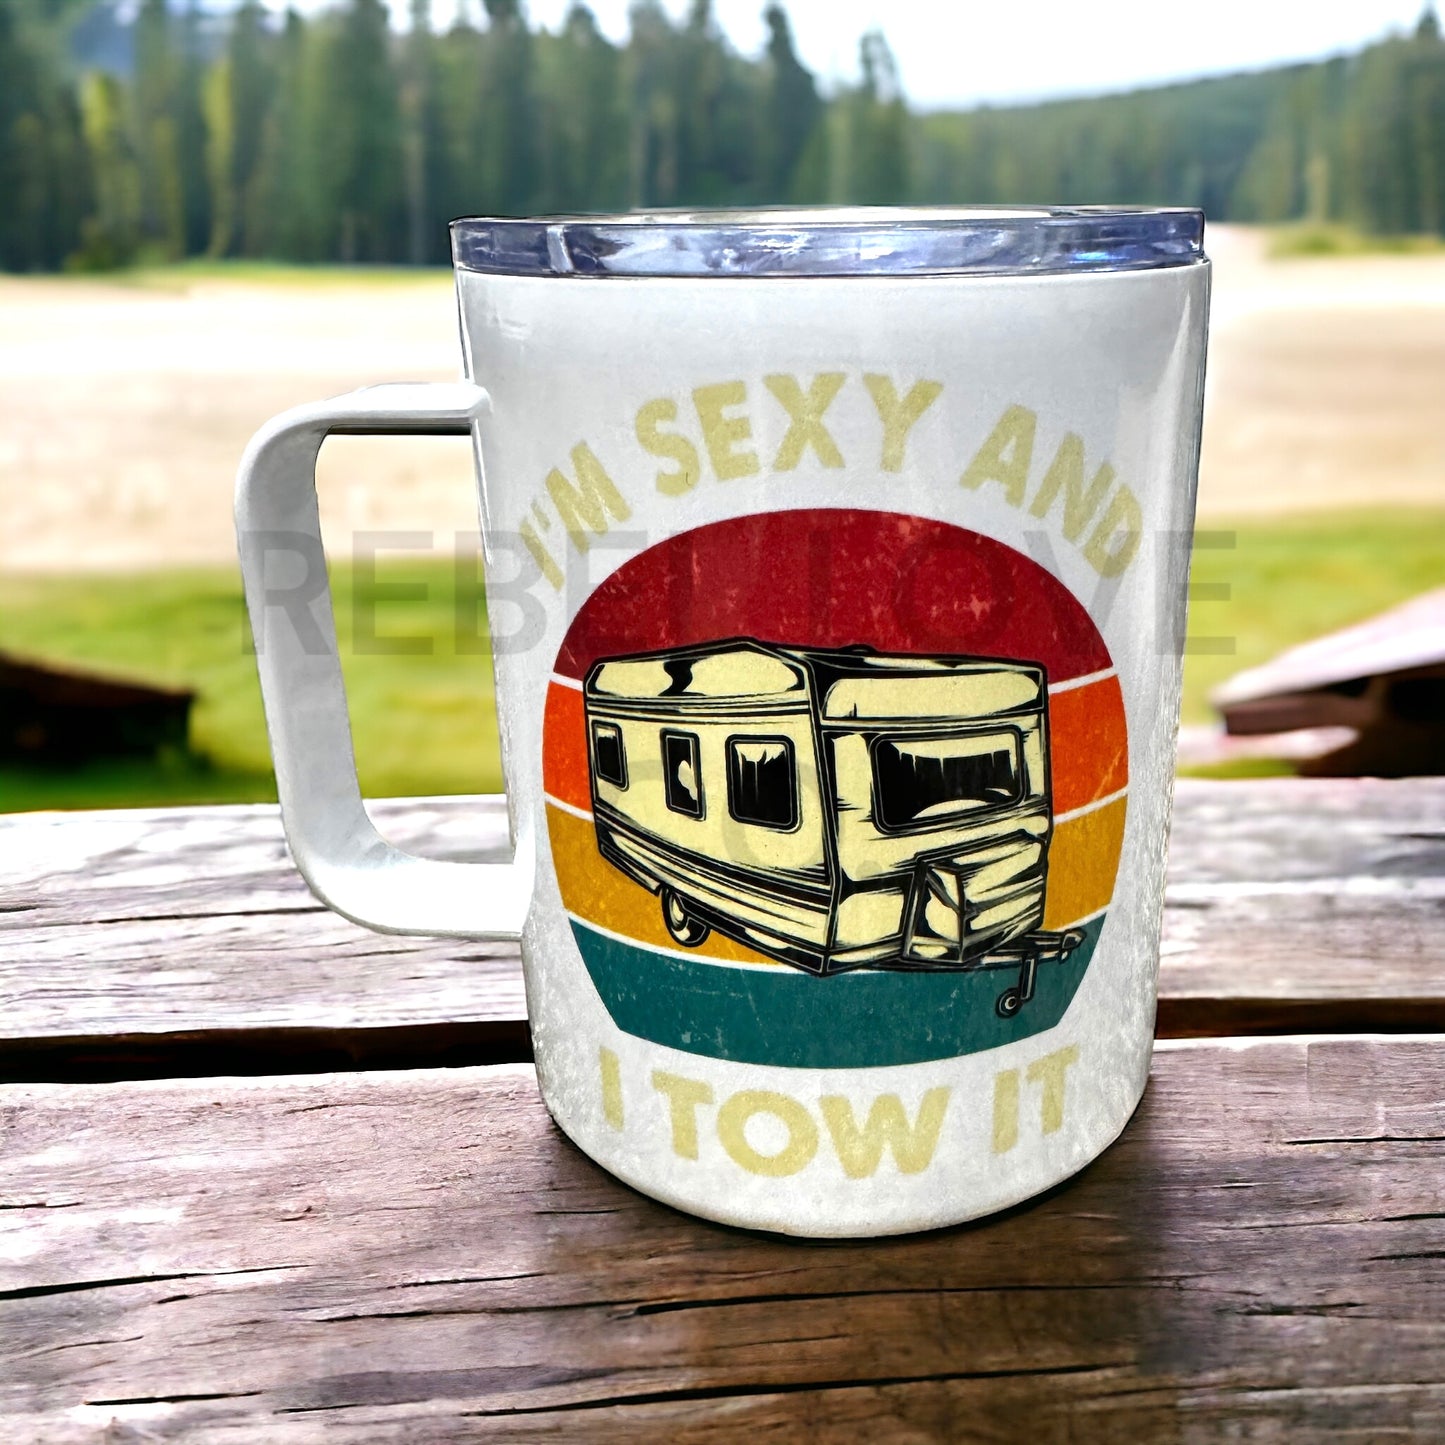 I'm Sexy and I Tow it Camper Travel Mug with handle and Lid 15oz